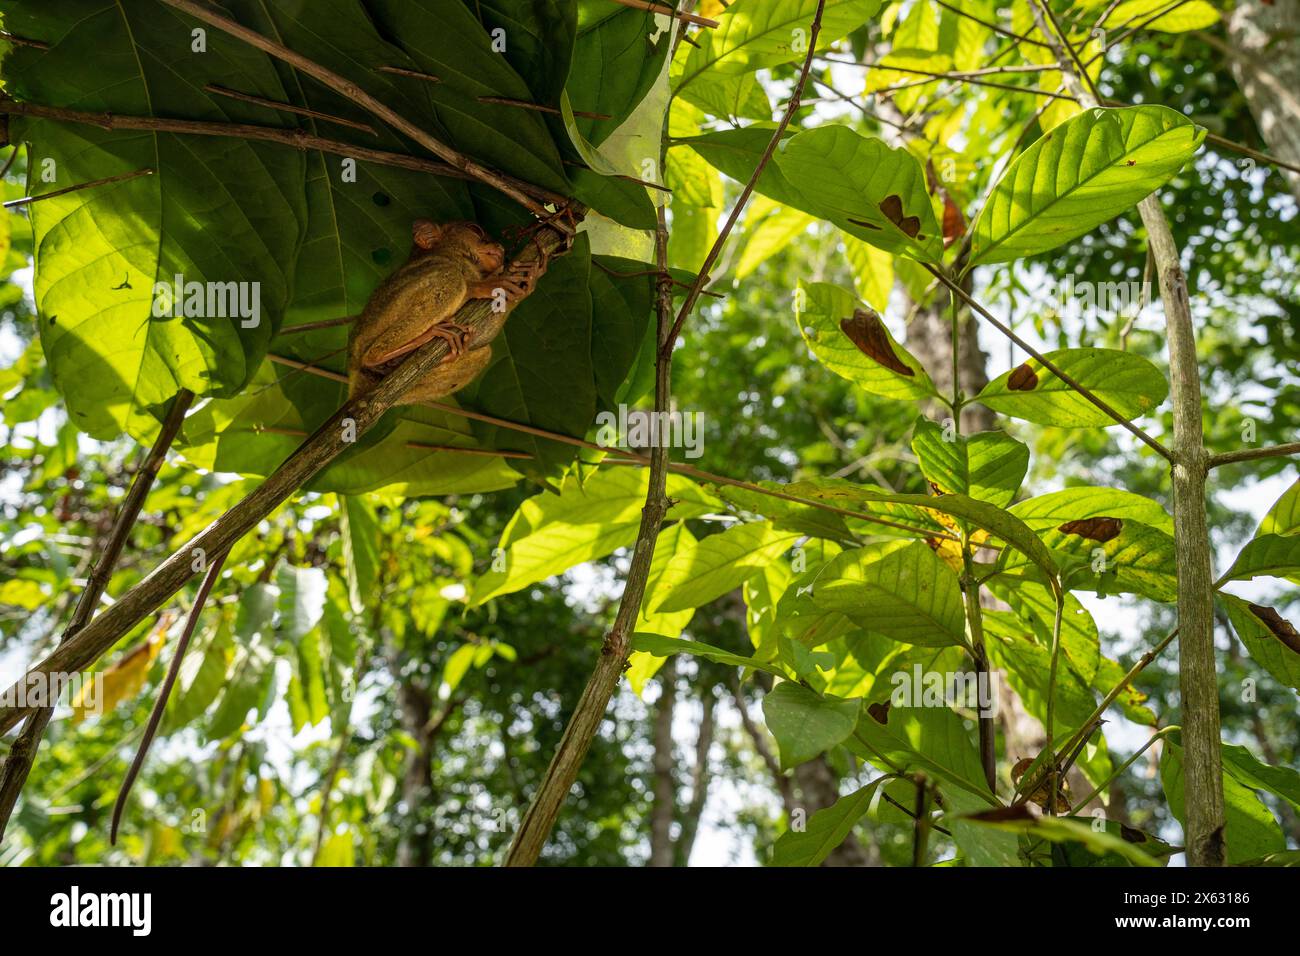 Hidden among the verdant foliage, a tarsier clings silently to a branch in its lush rainforest home. This image captures the tiny primate in a rare mo Stock Photo